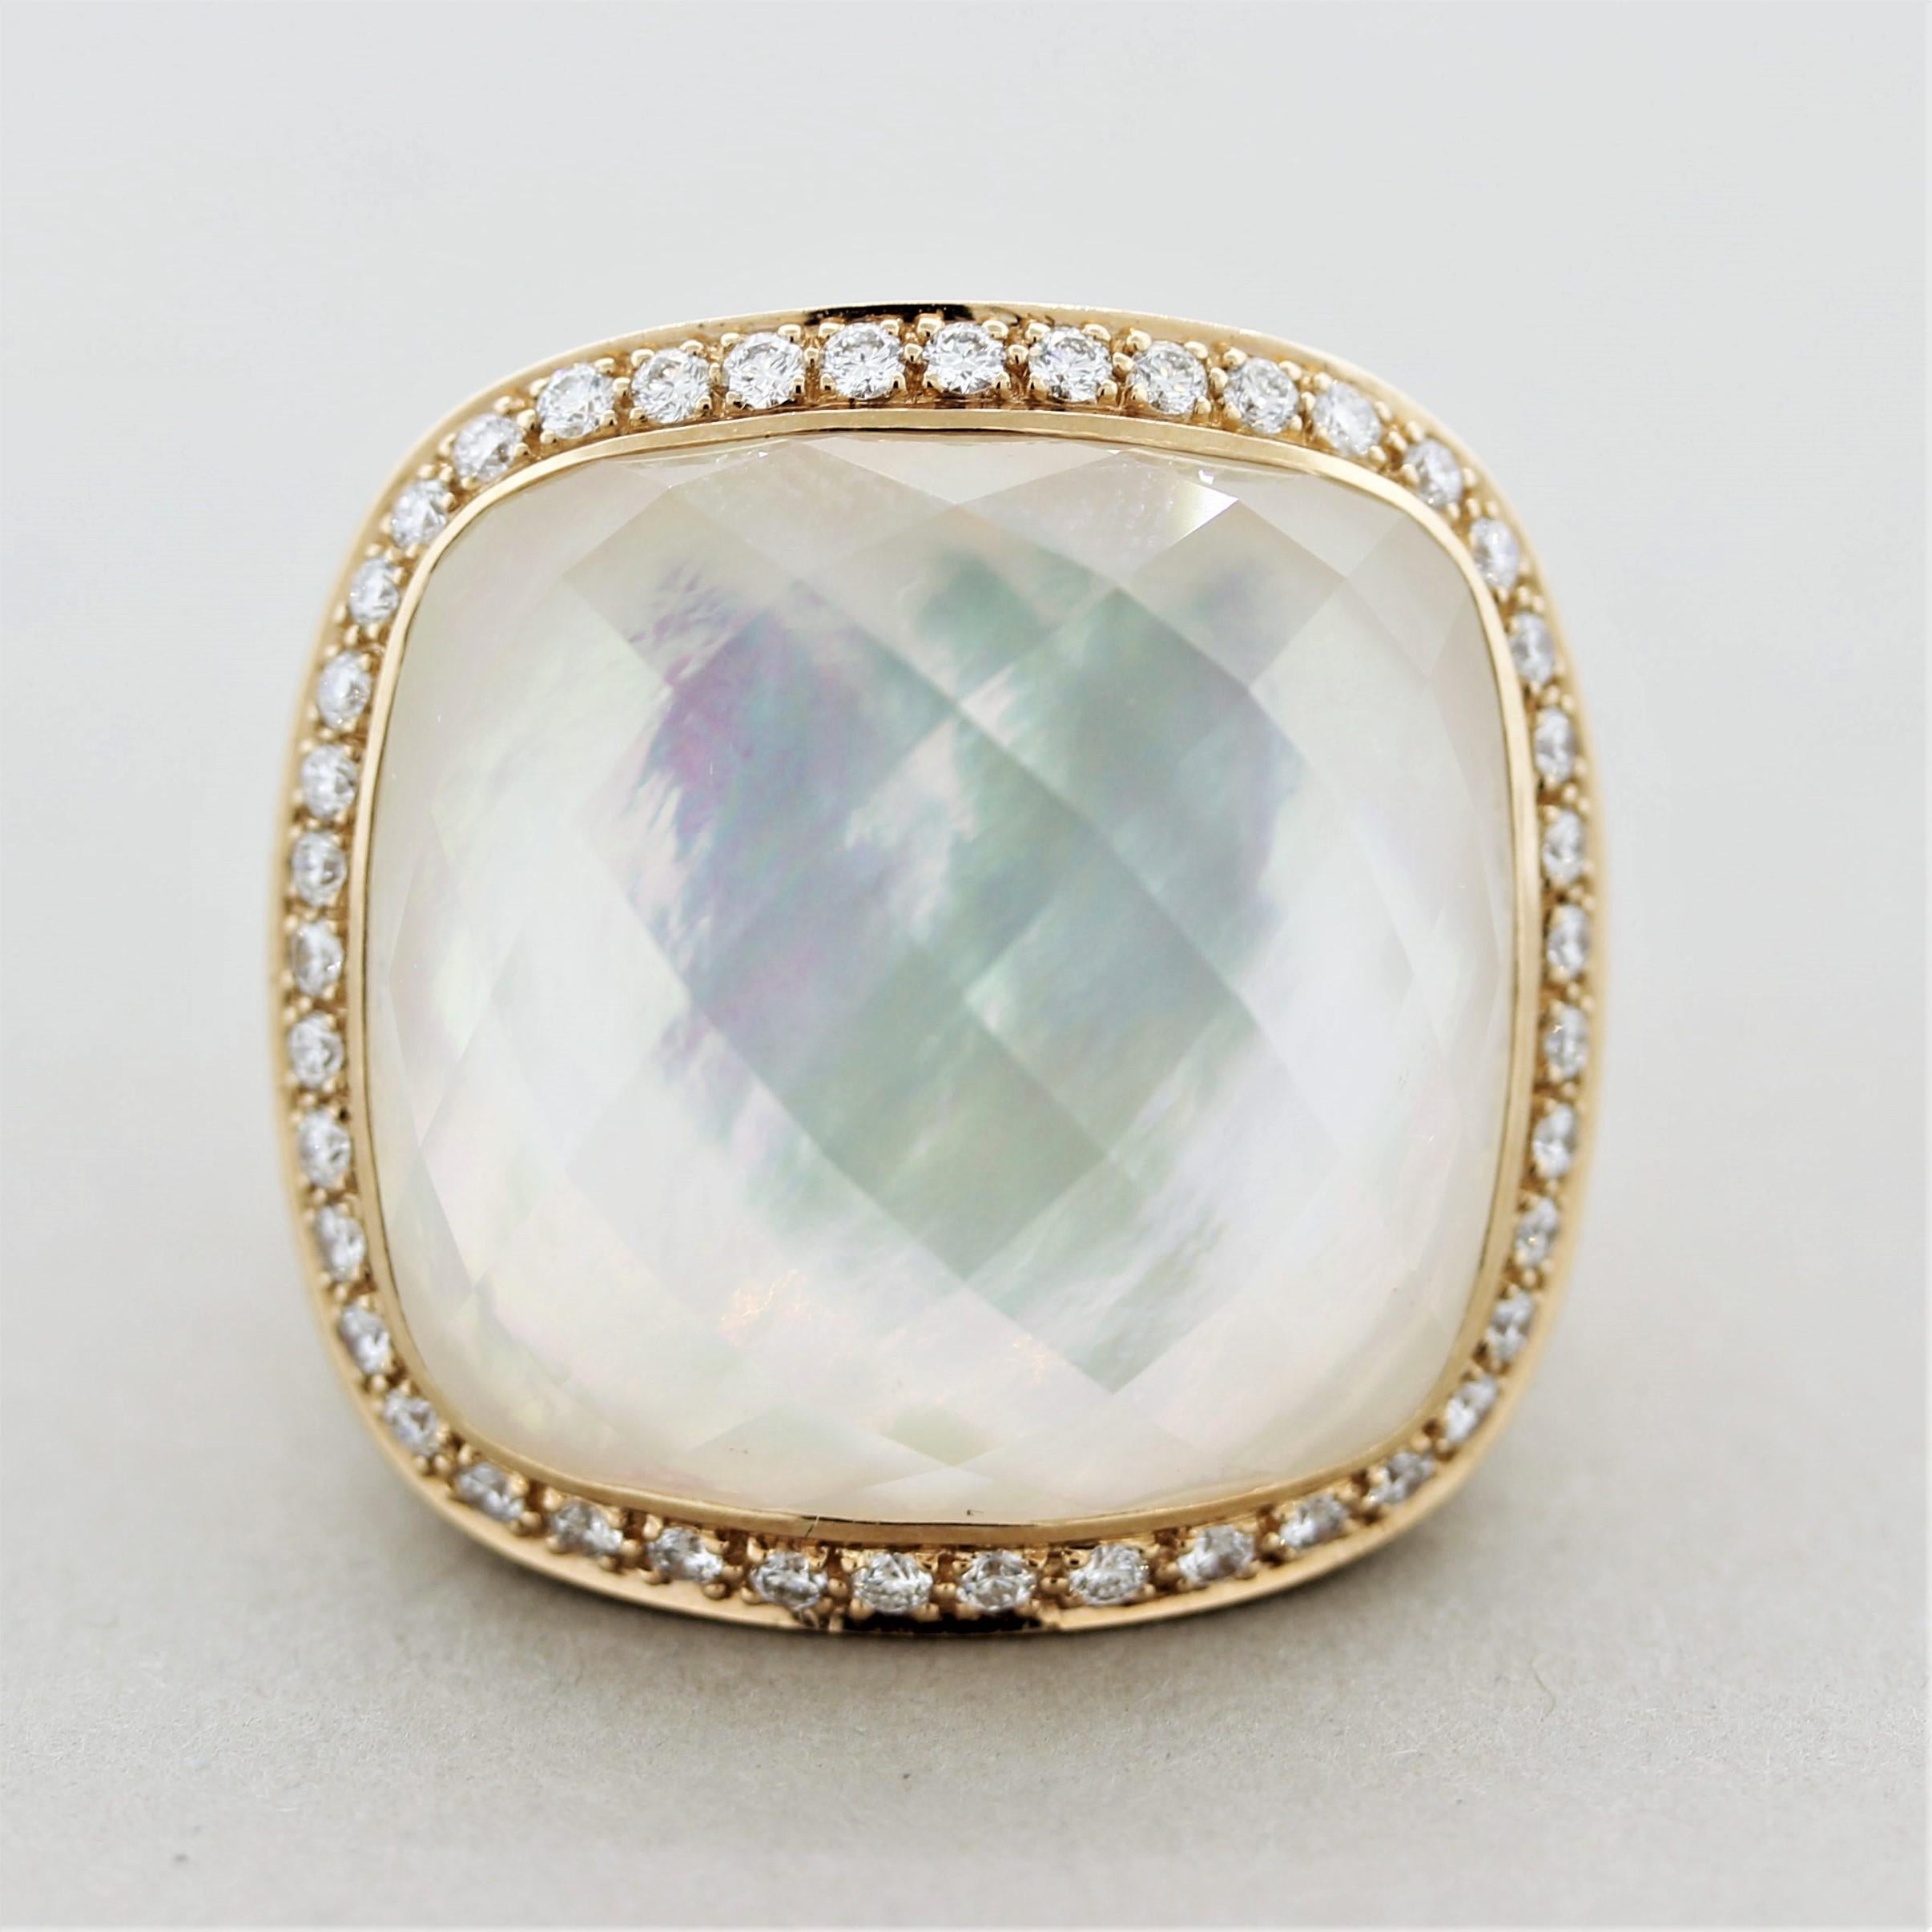 A big bright and stylish cocktail ring featuring an array of multi-colors. The ring features a 27.03 carat rose-cut quartz crystal which is set over a base of mother-of-pearl displaying strong iridescence (natural color phenomenon). This lovely